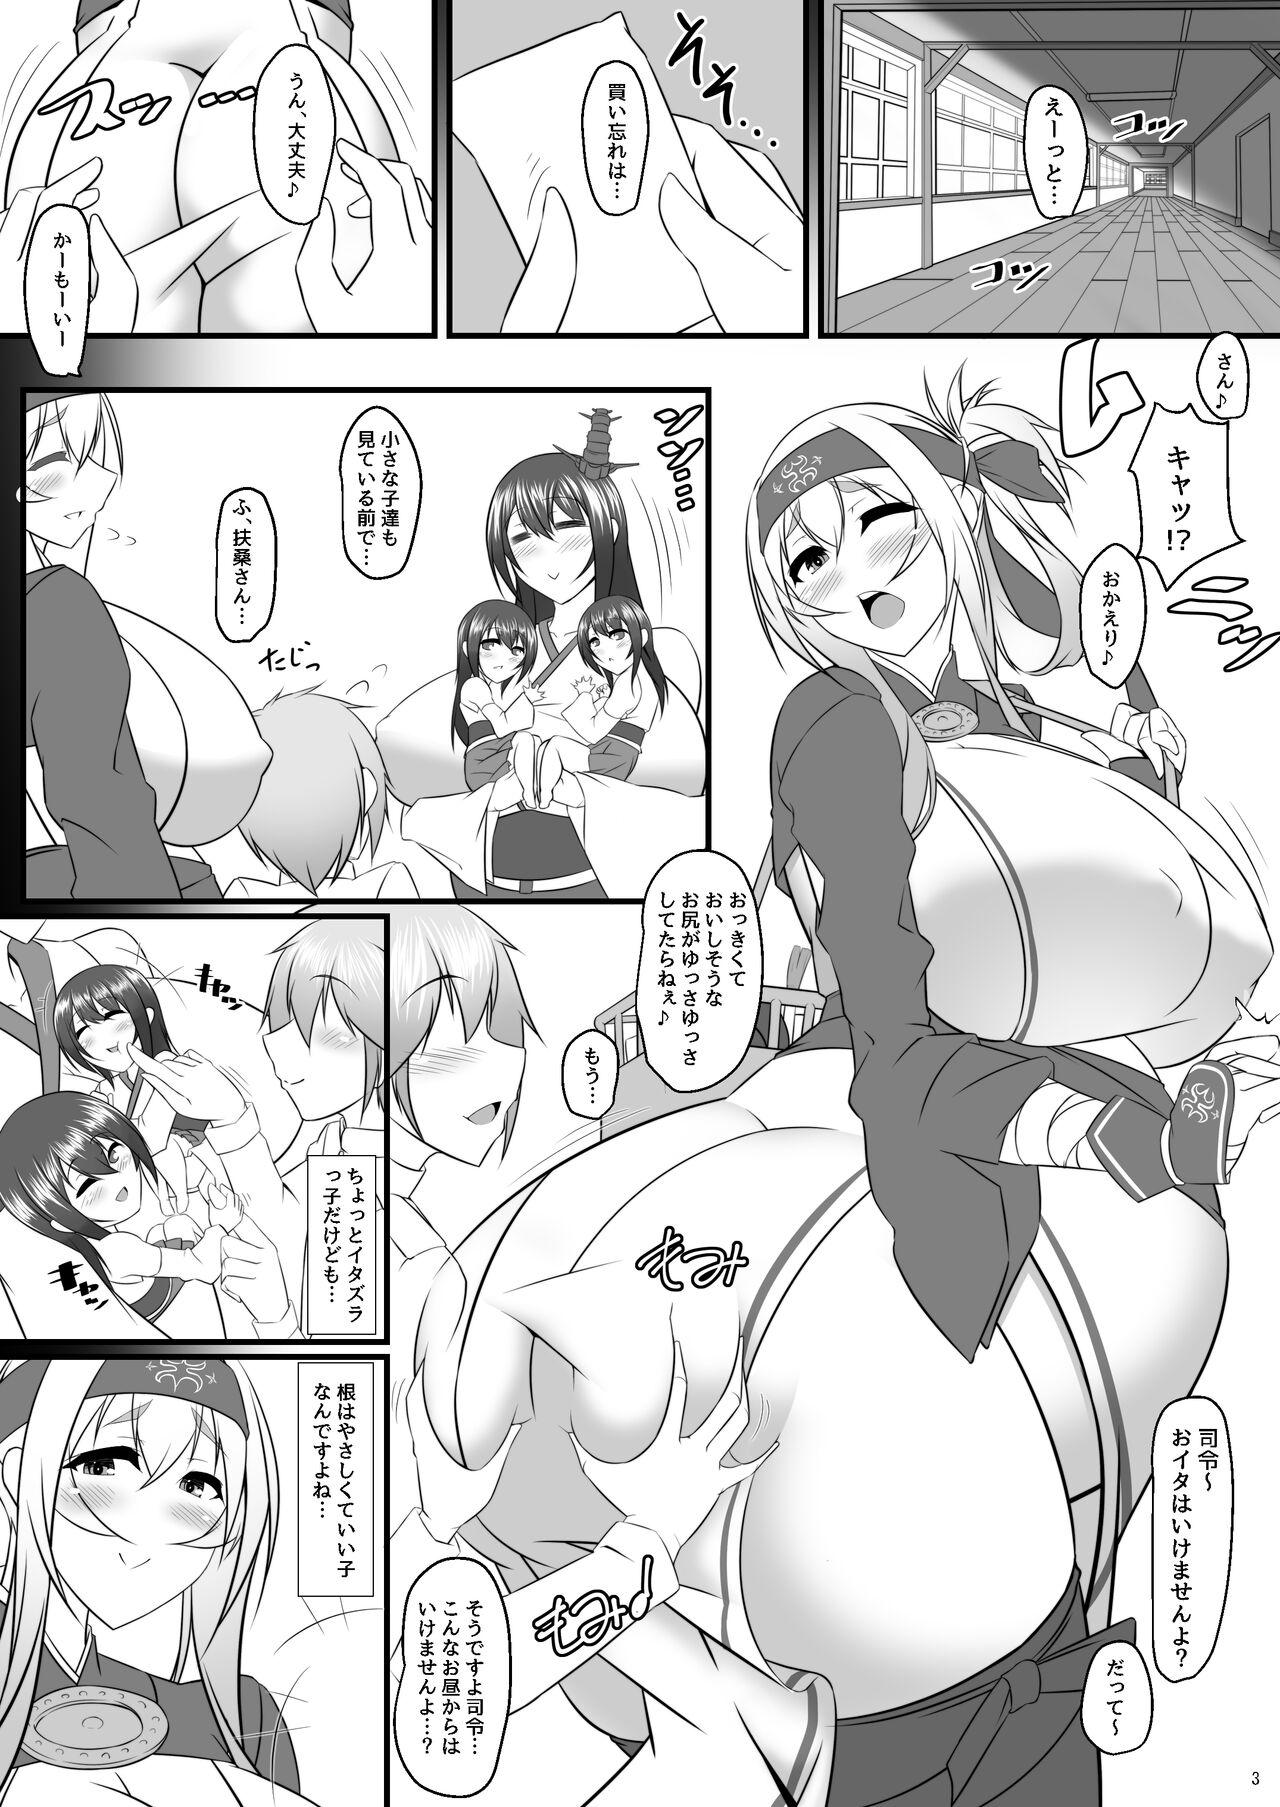 Webcams Bote Colle 6 - Kantai collection Transvestite - Page 3